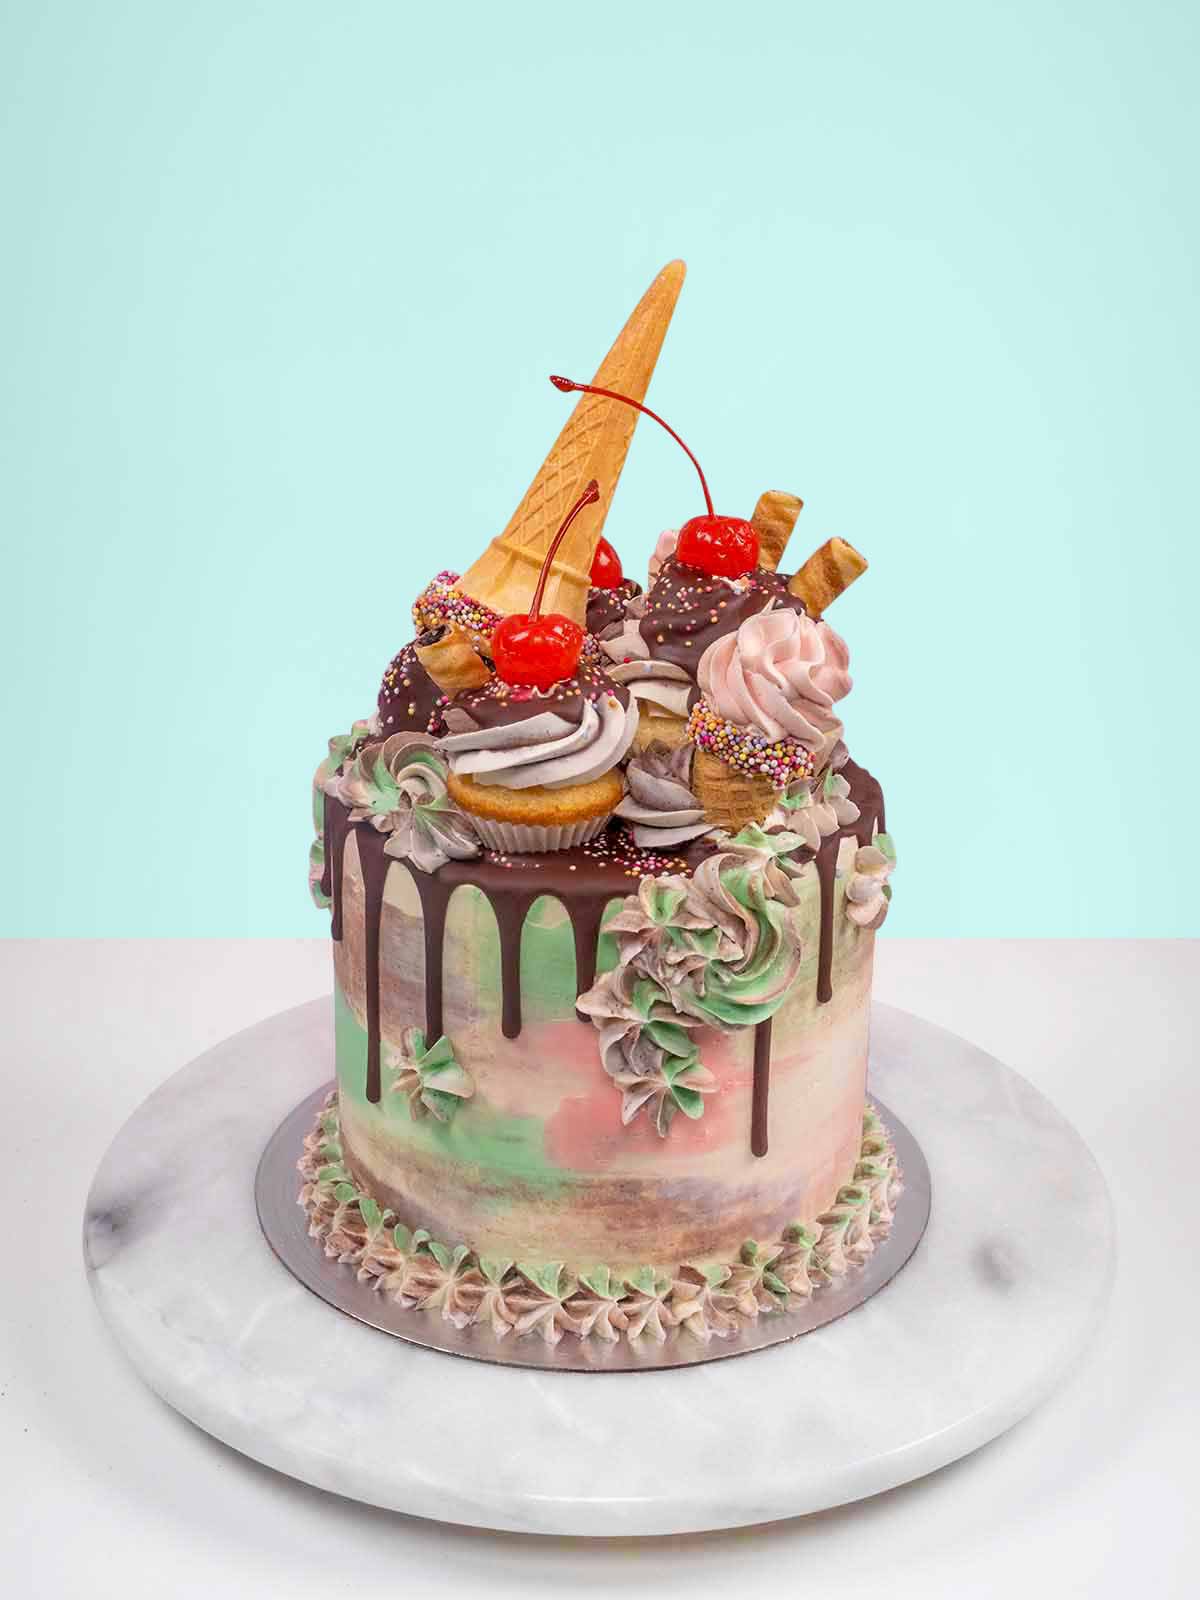 Food to Order - Cakes, Desserts & Chesses | Cakes Delivered London |  Harrods UK